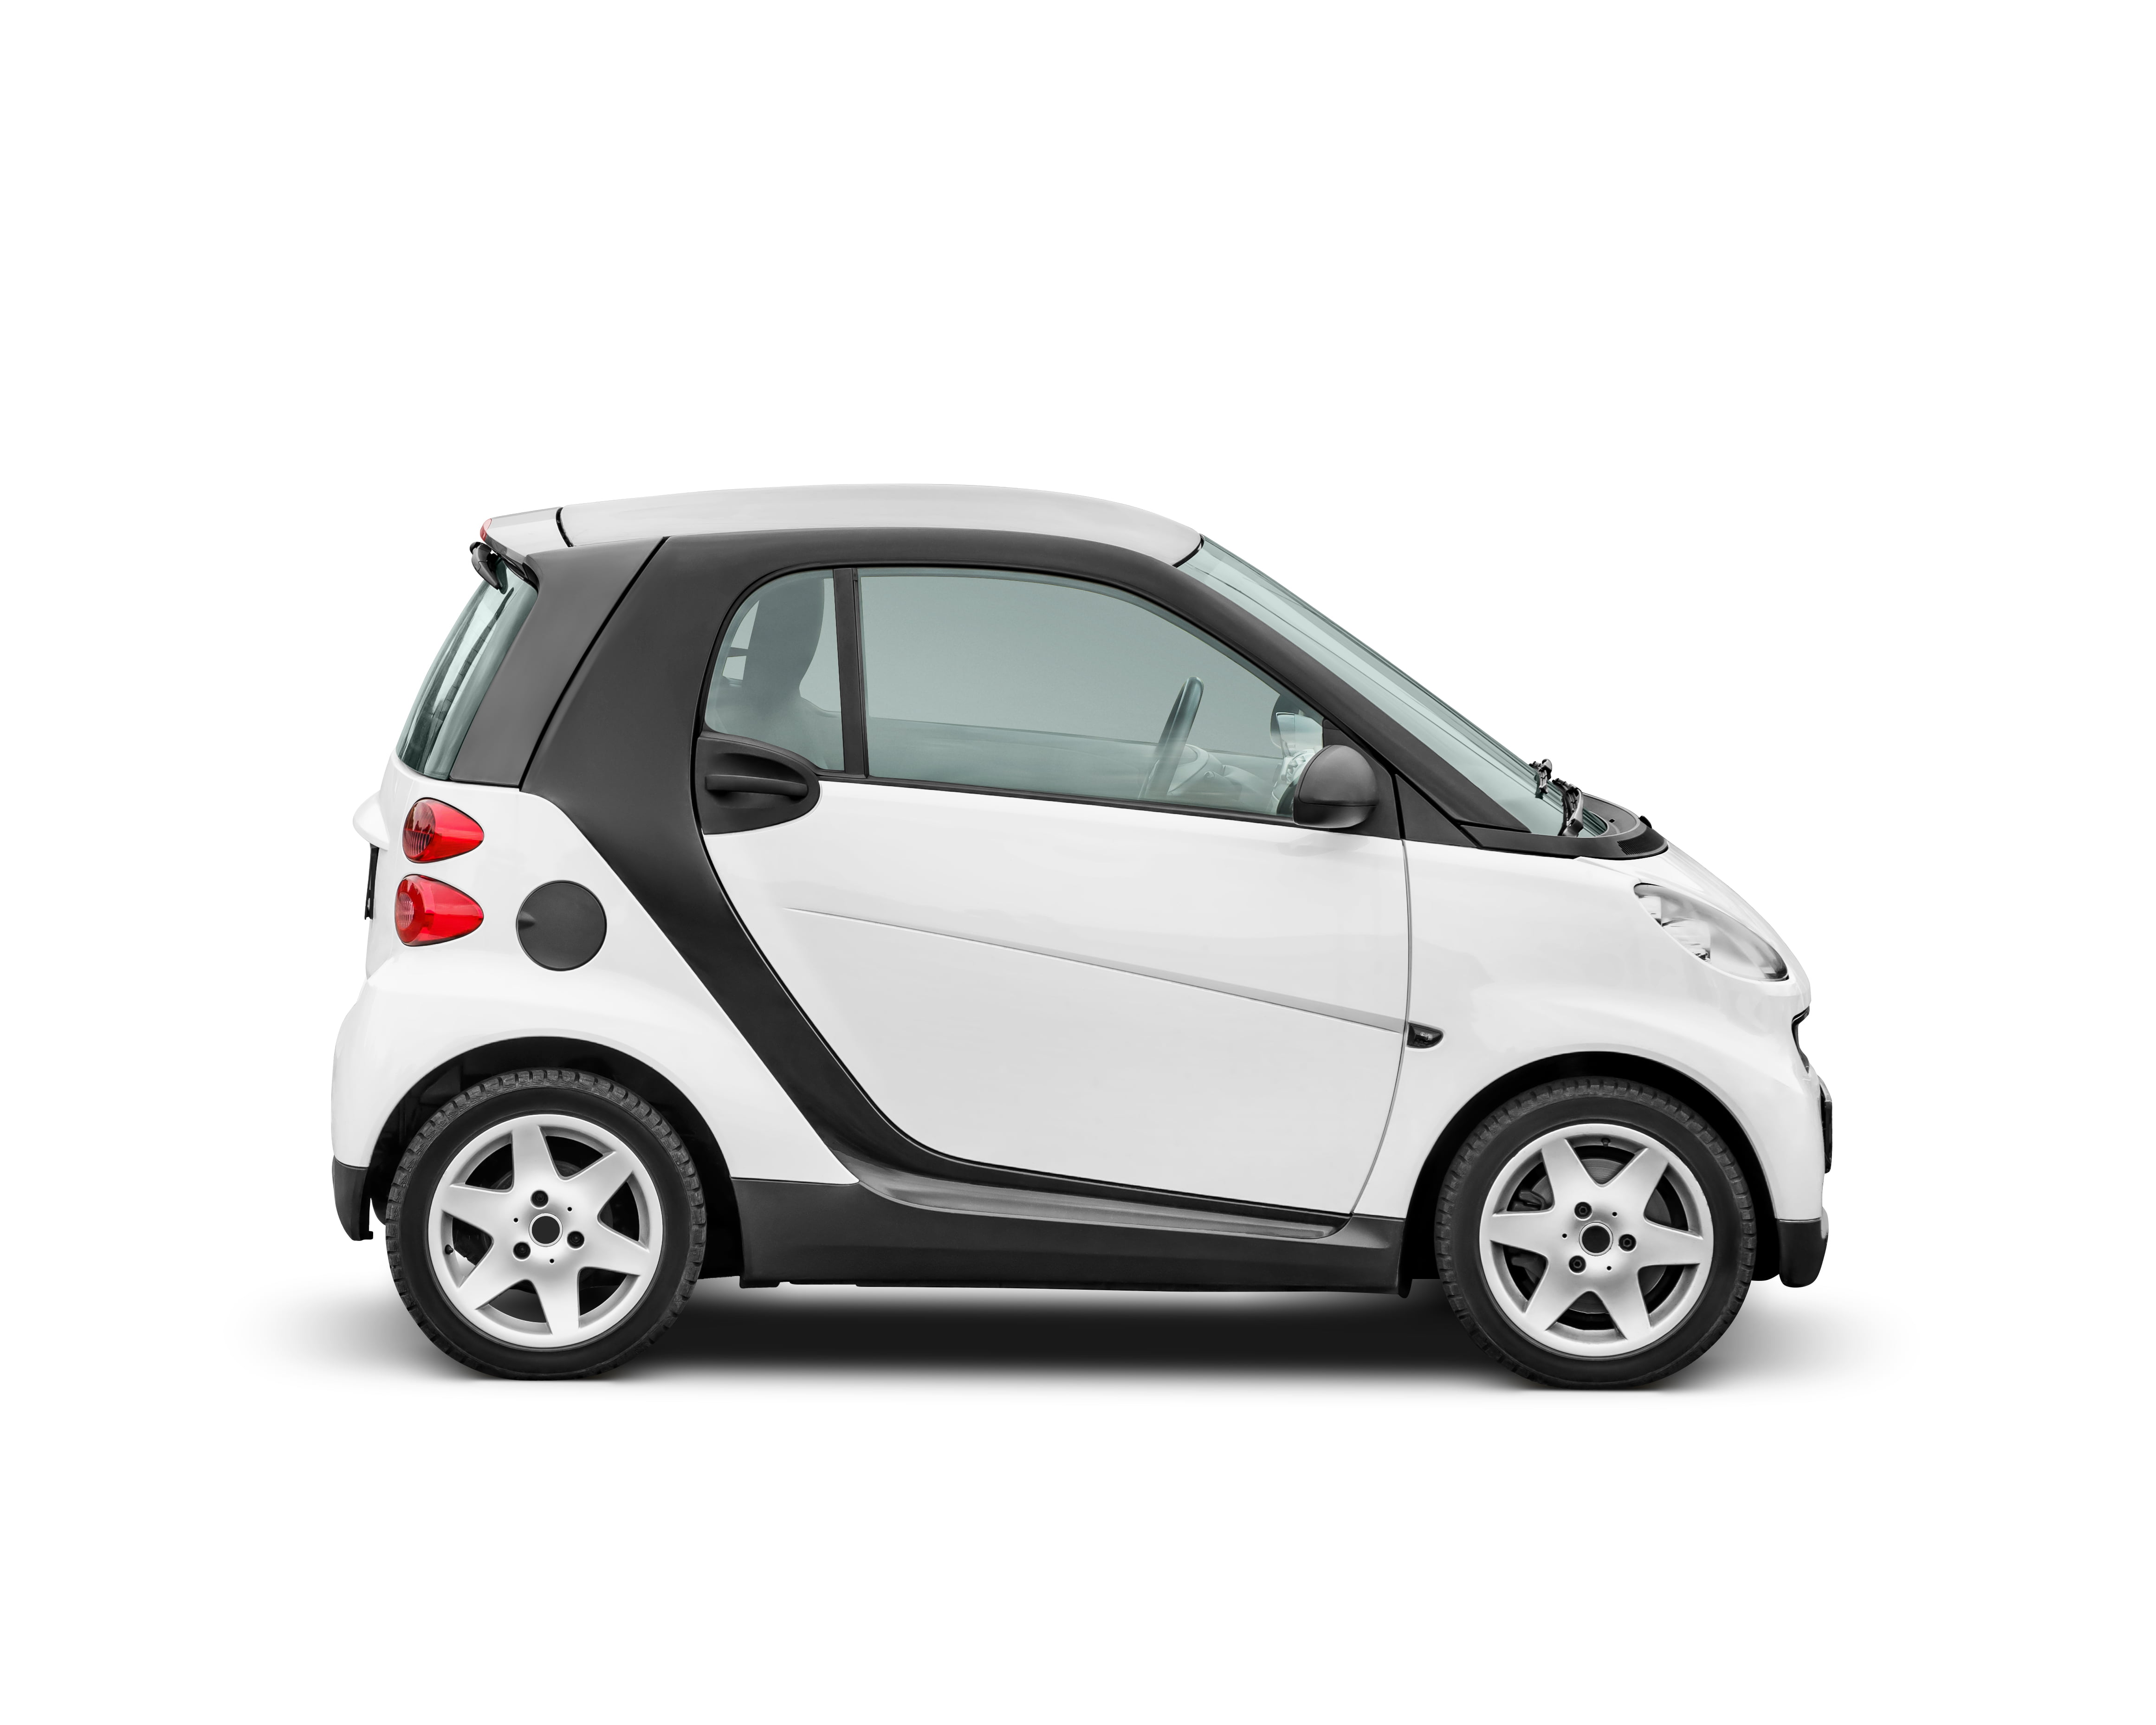 White small 2-occupant city car isolated on white background with clipping path.